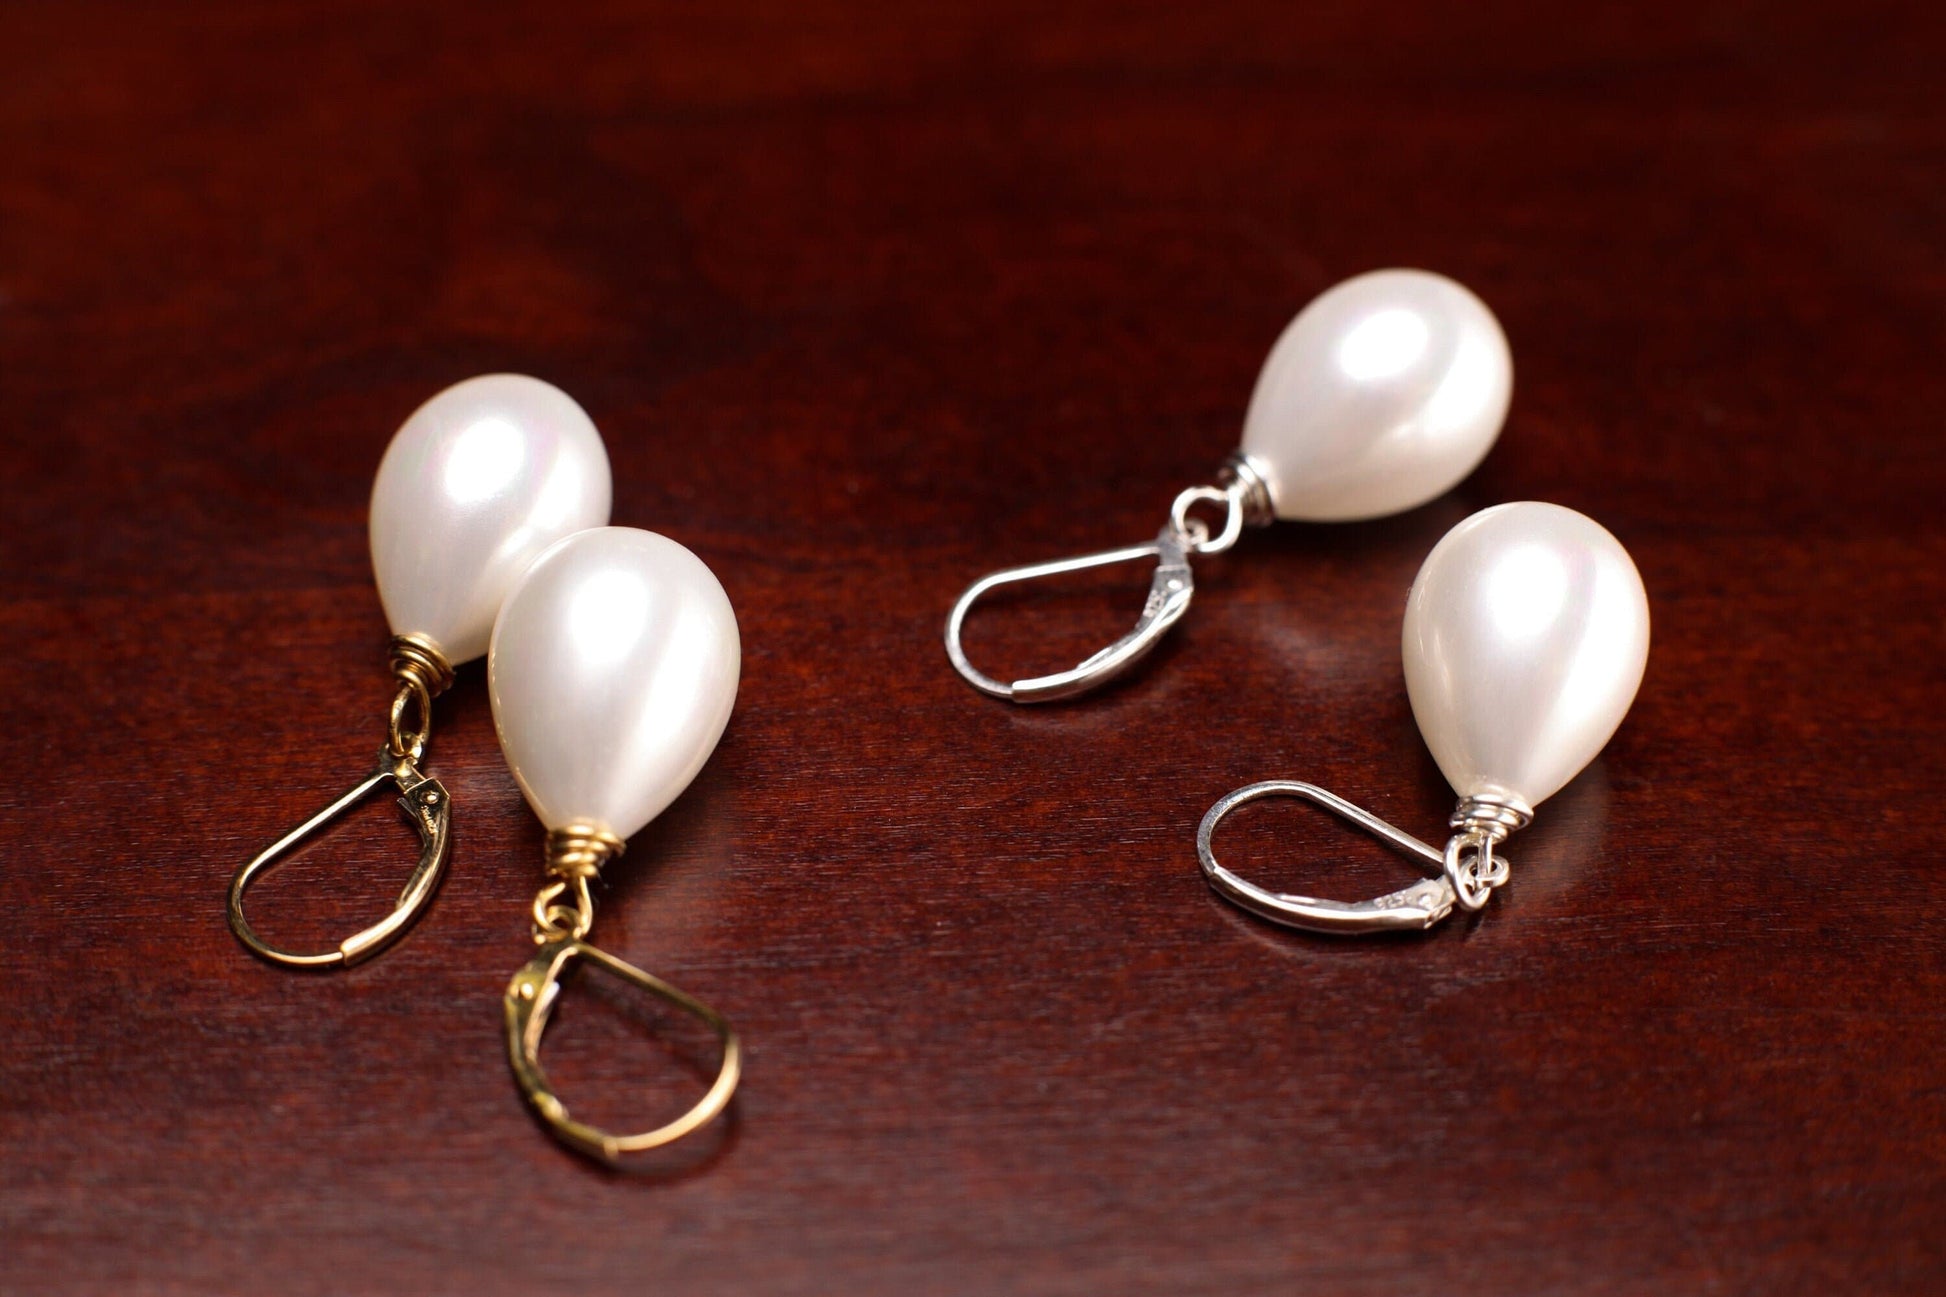 White South SeaShell Pearl drop 14x20mm Large High Luster Briolette 925 Sterling Silver,14k Gold Filled Leverback Earrings, Elegant ,Bridal.